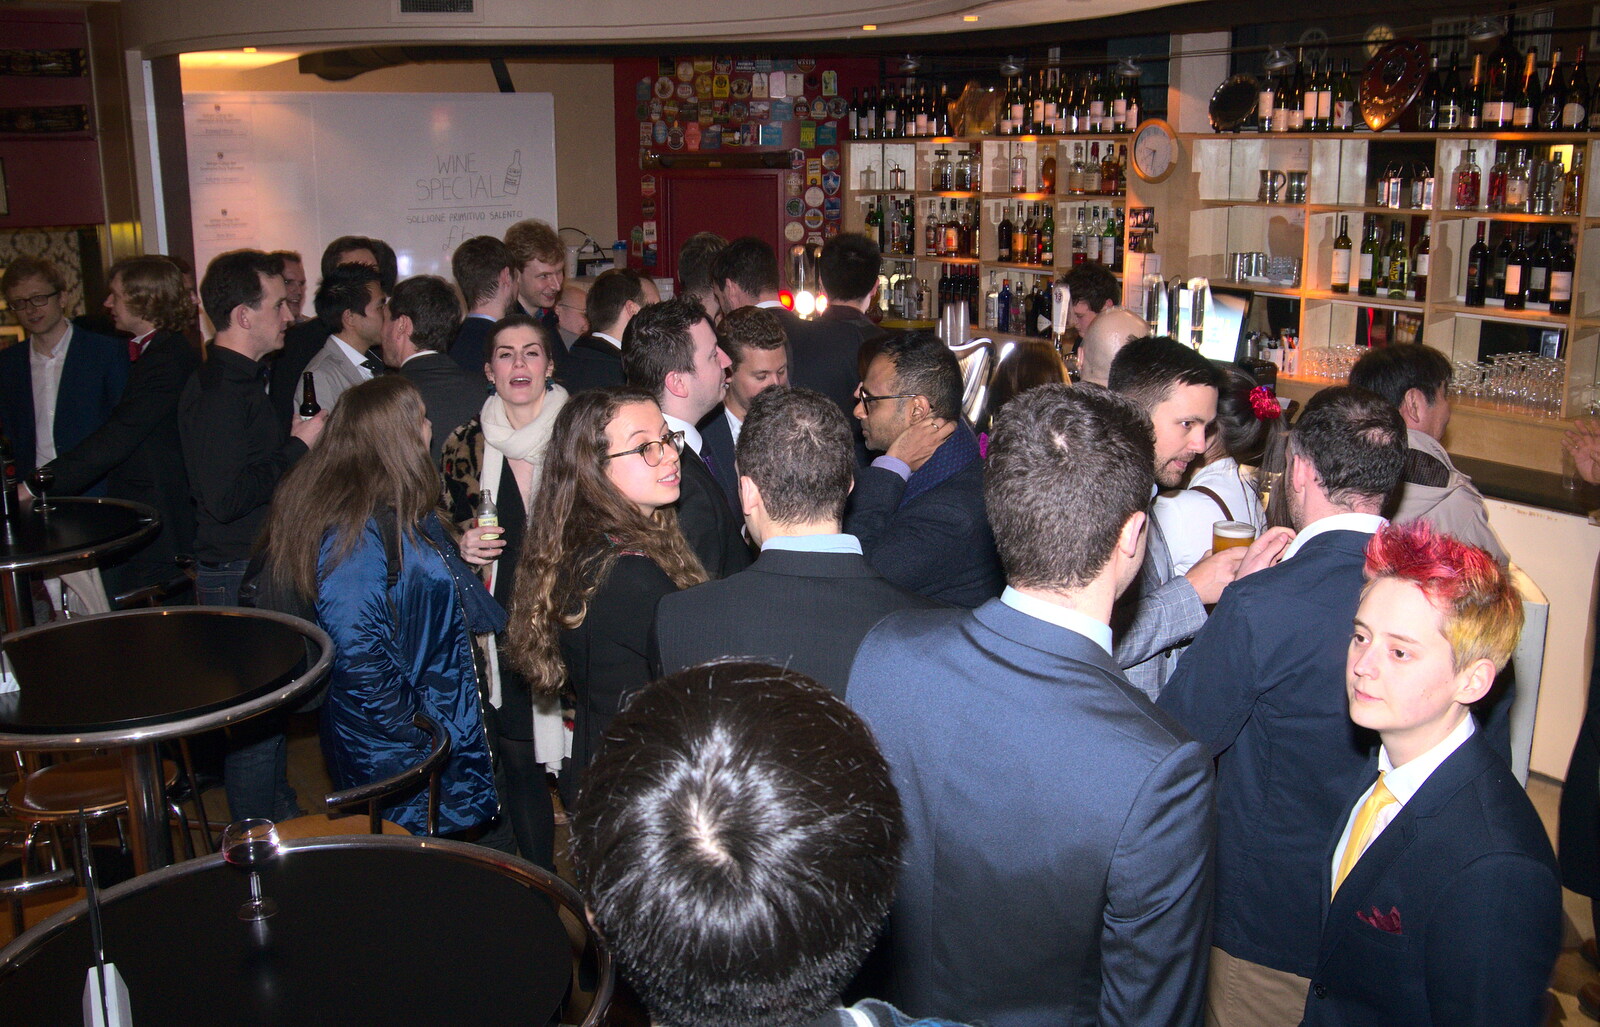 The reunion moves into the Students' Union bar from SwiftKey's Ten Year Anniversary Reunion, Selwyn College, Cambridge - 11th January 2019